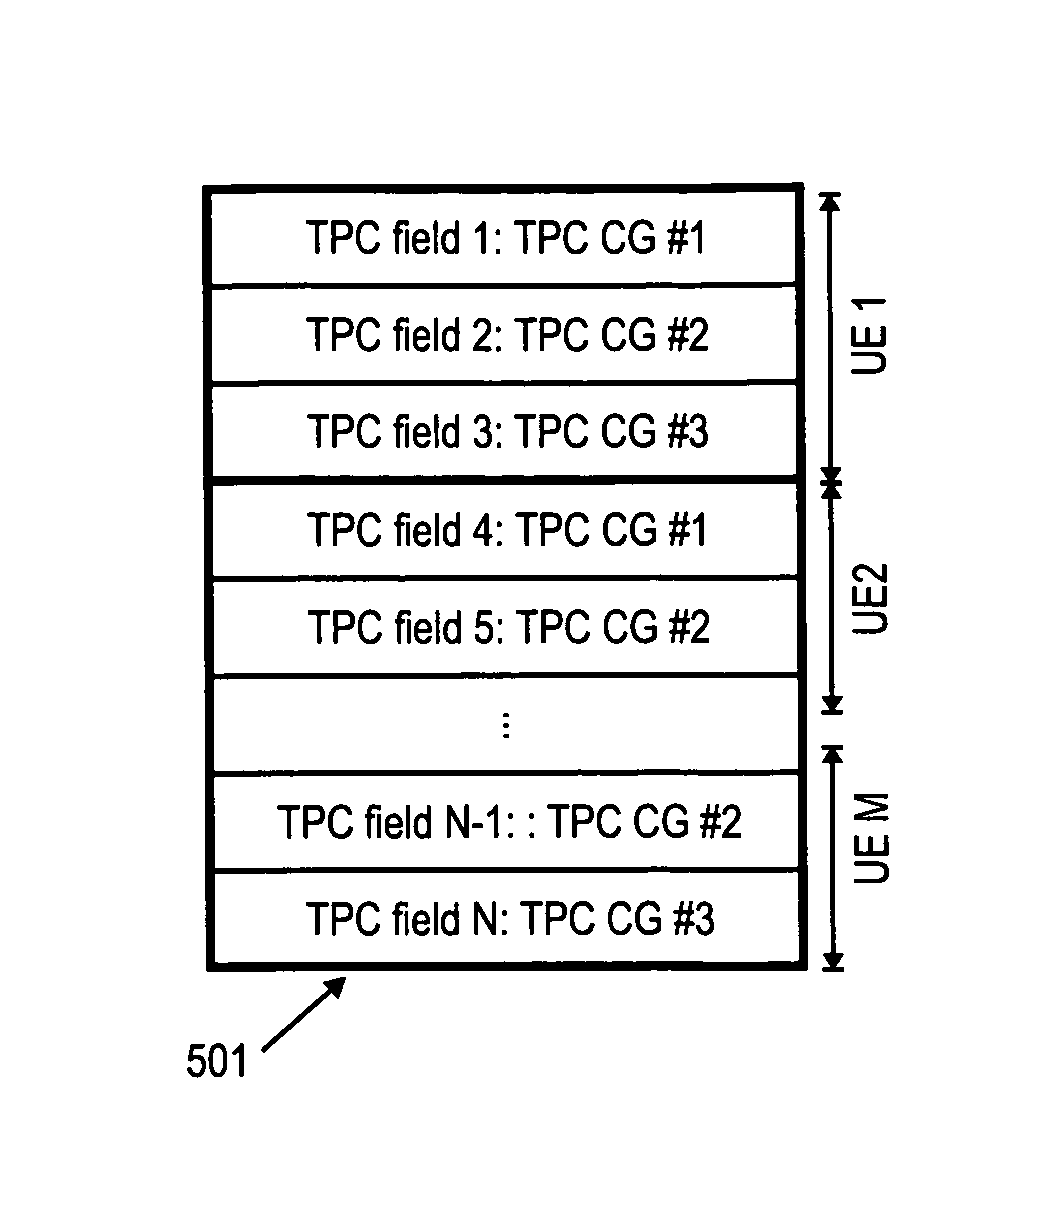 Transmit power control signaling for communication systems using carrier aggregation